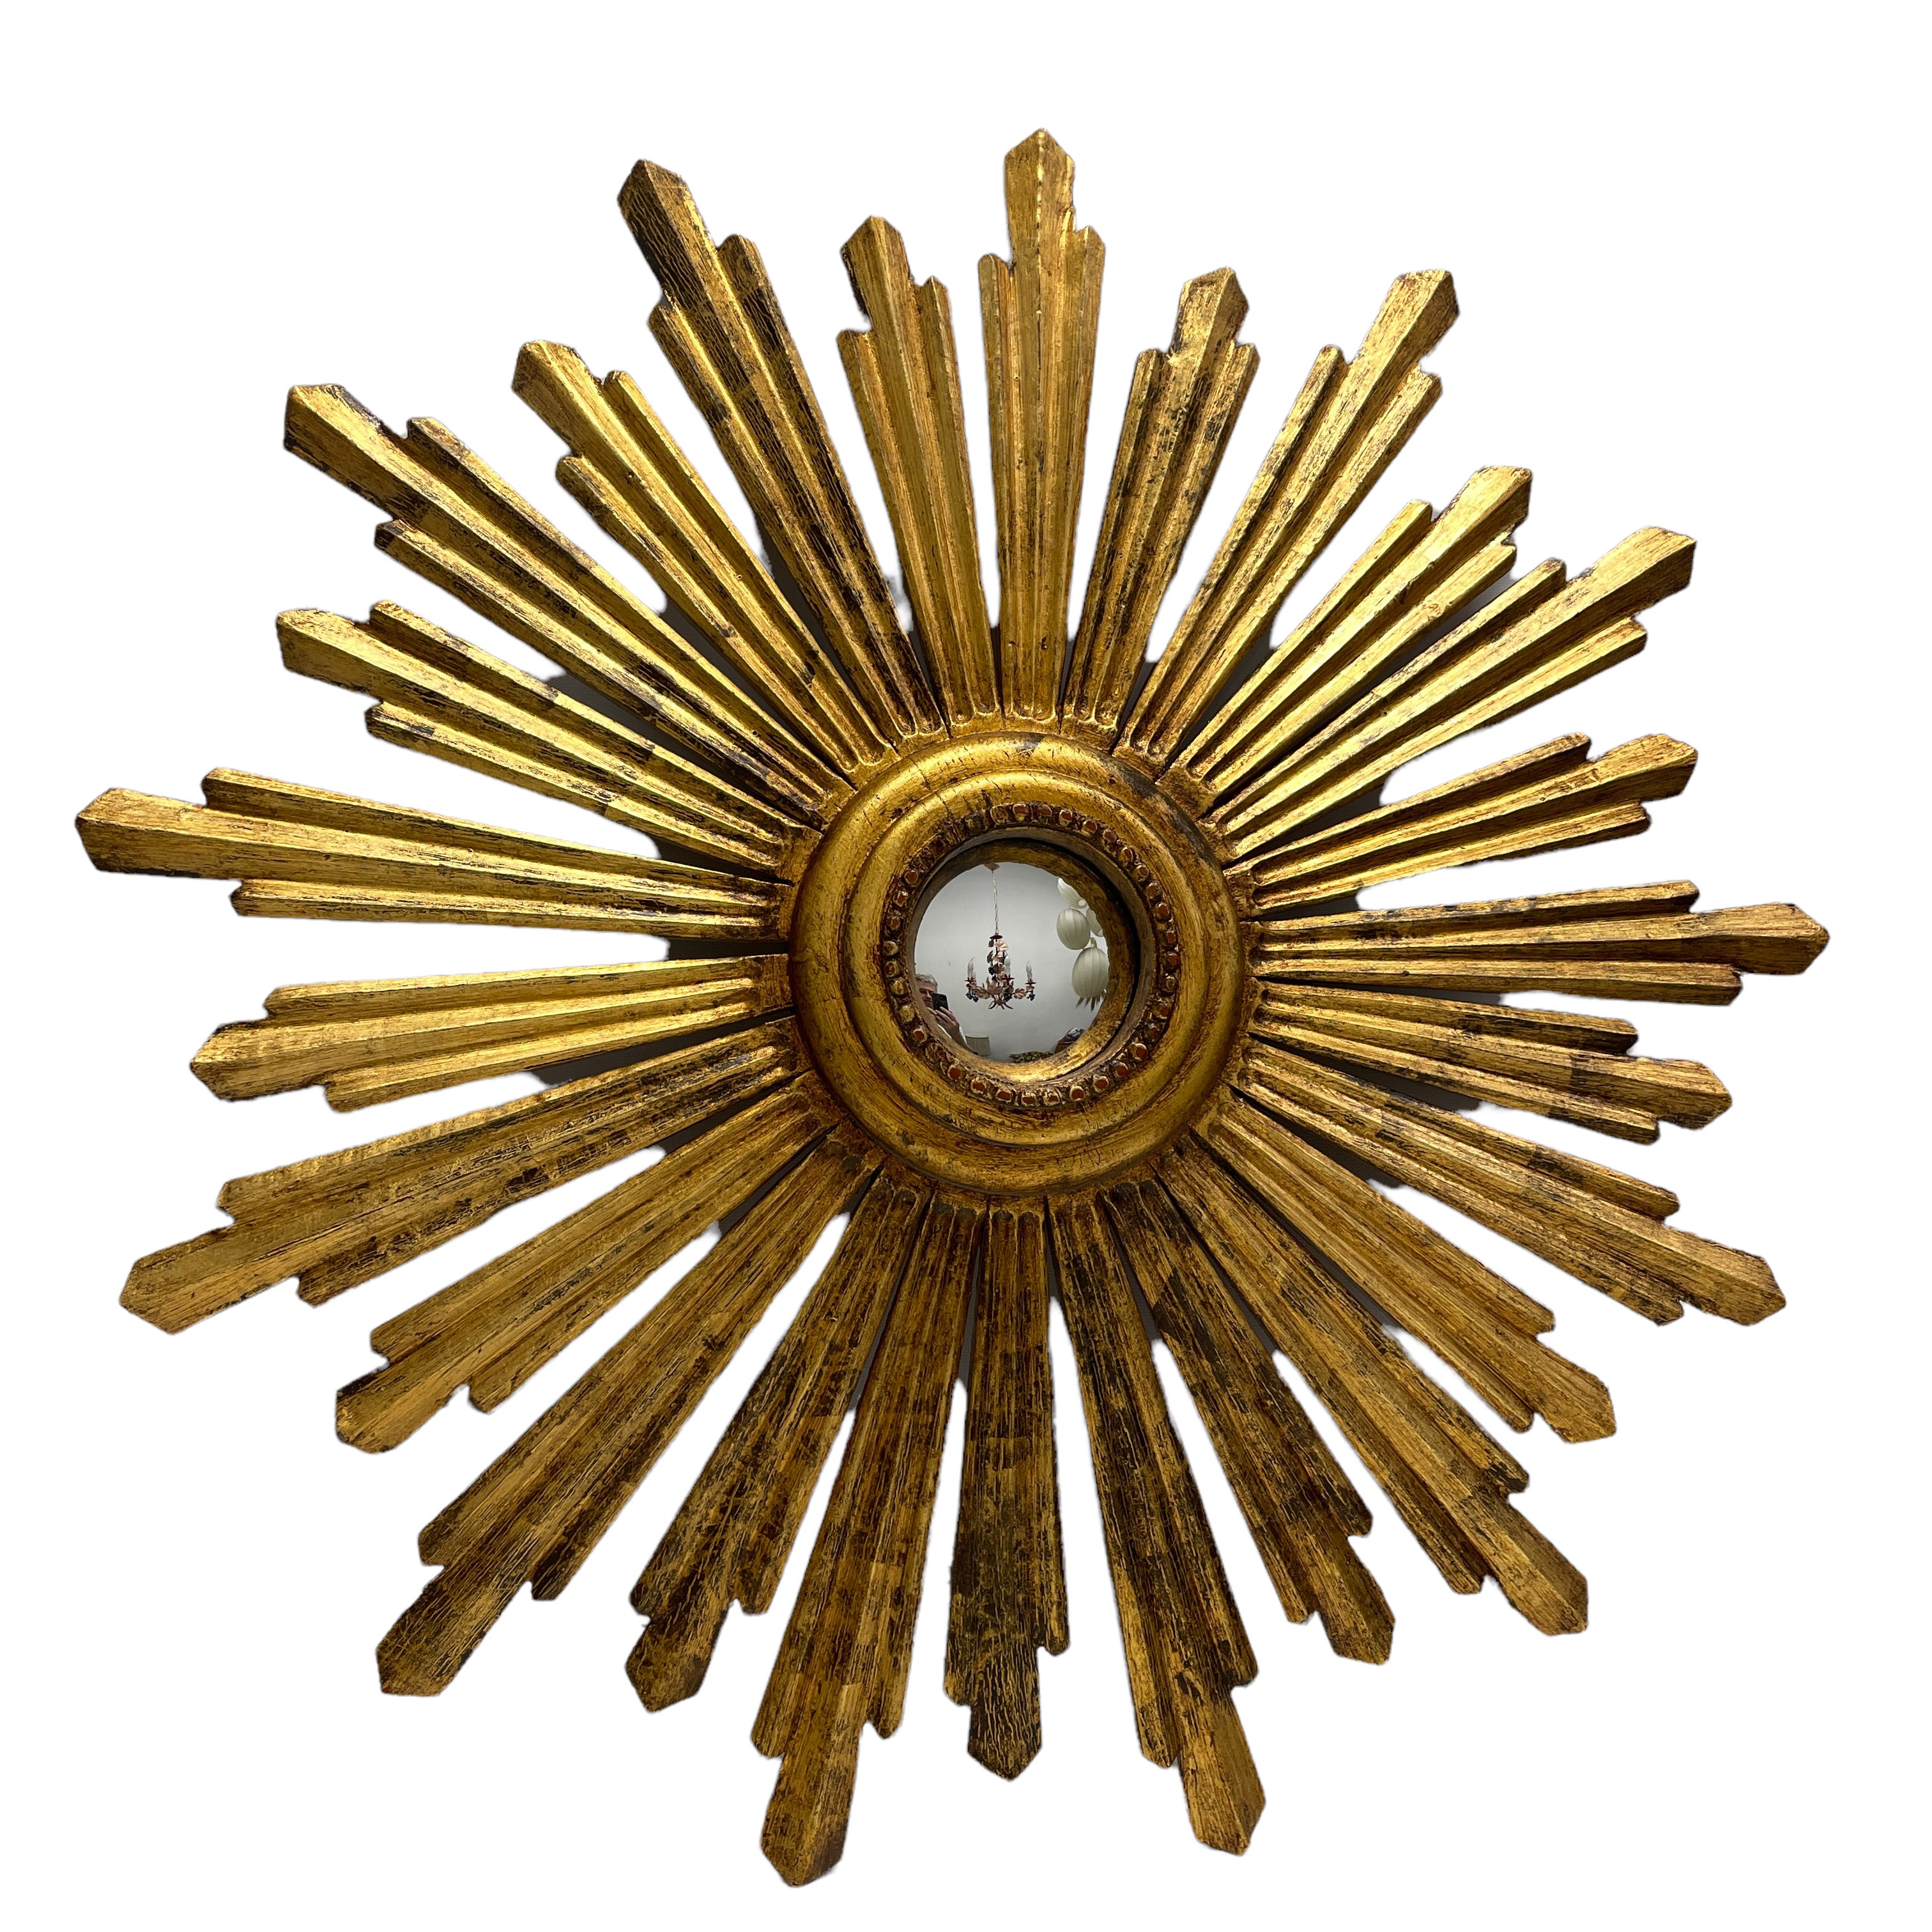 A beautiful starburst sunburst mirror. Made of gilded wood. It measures approximate 27